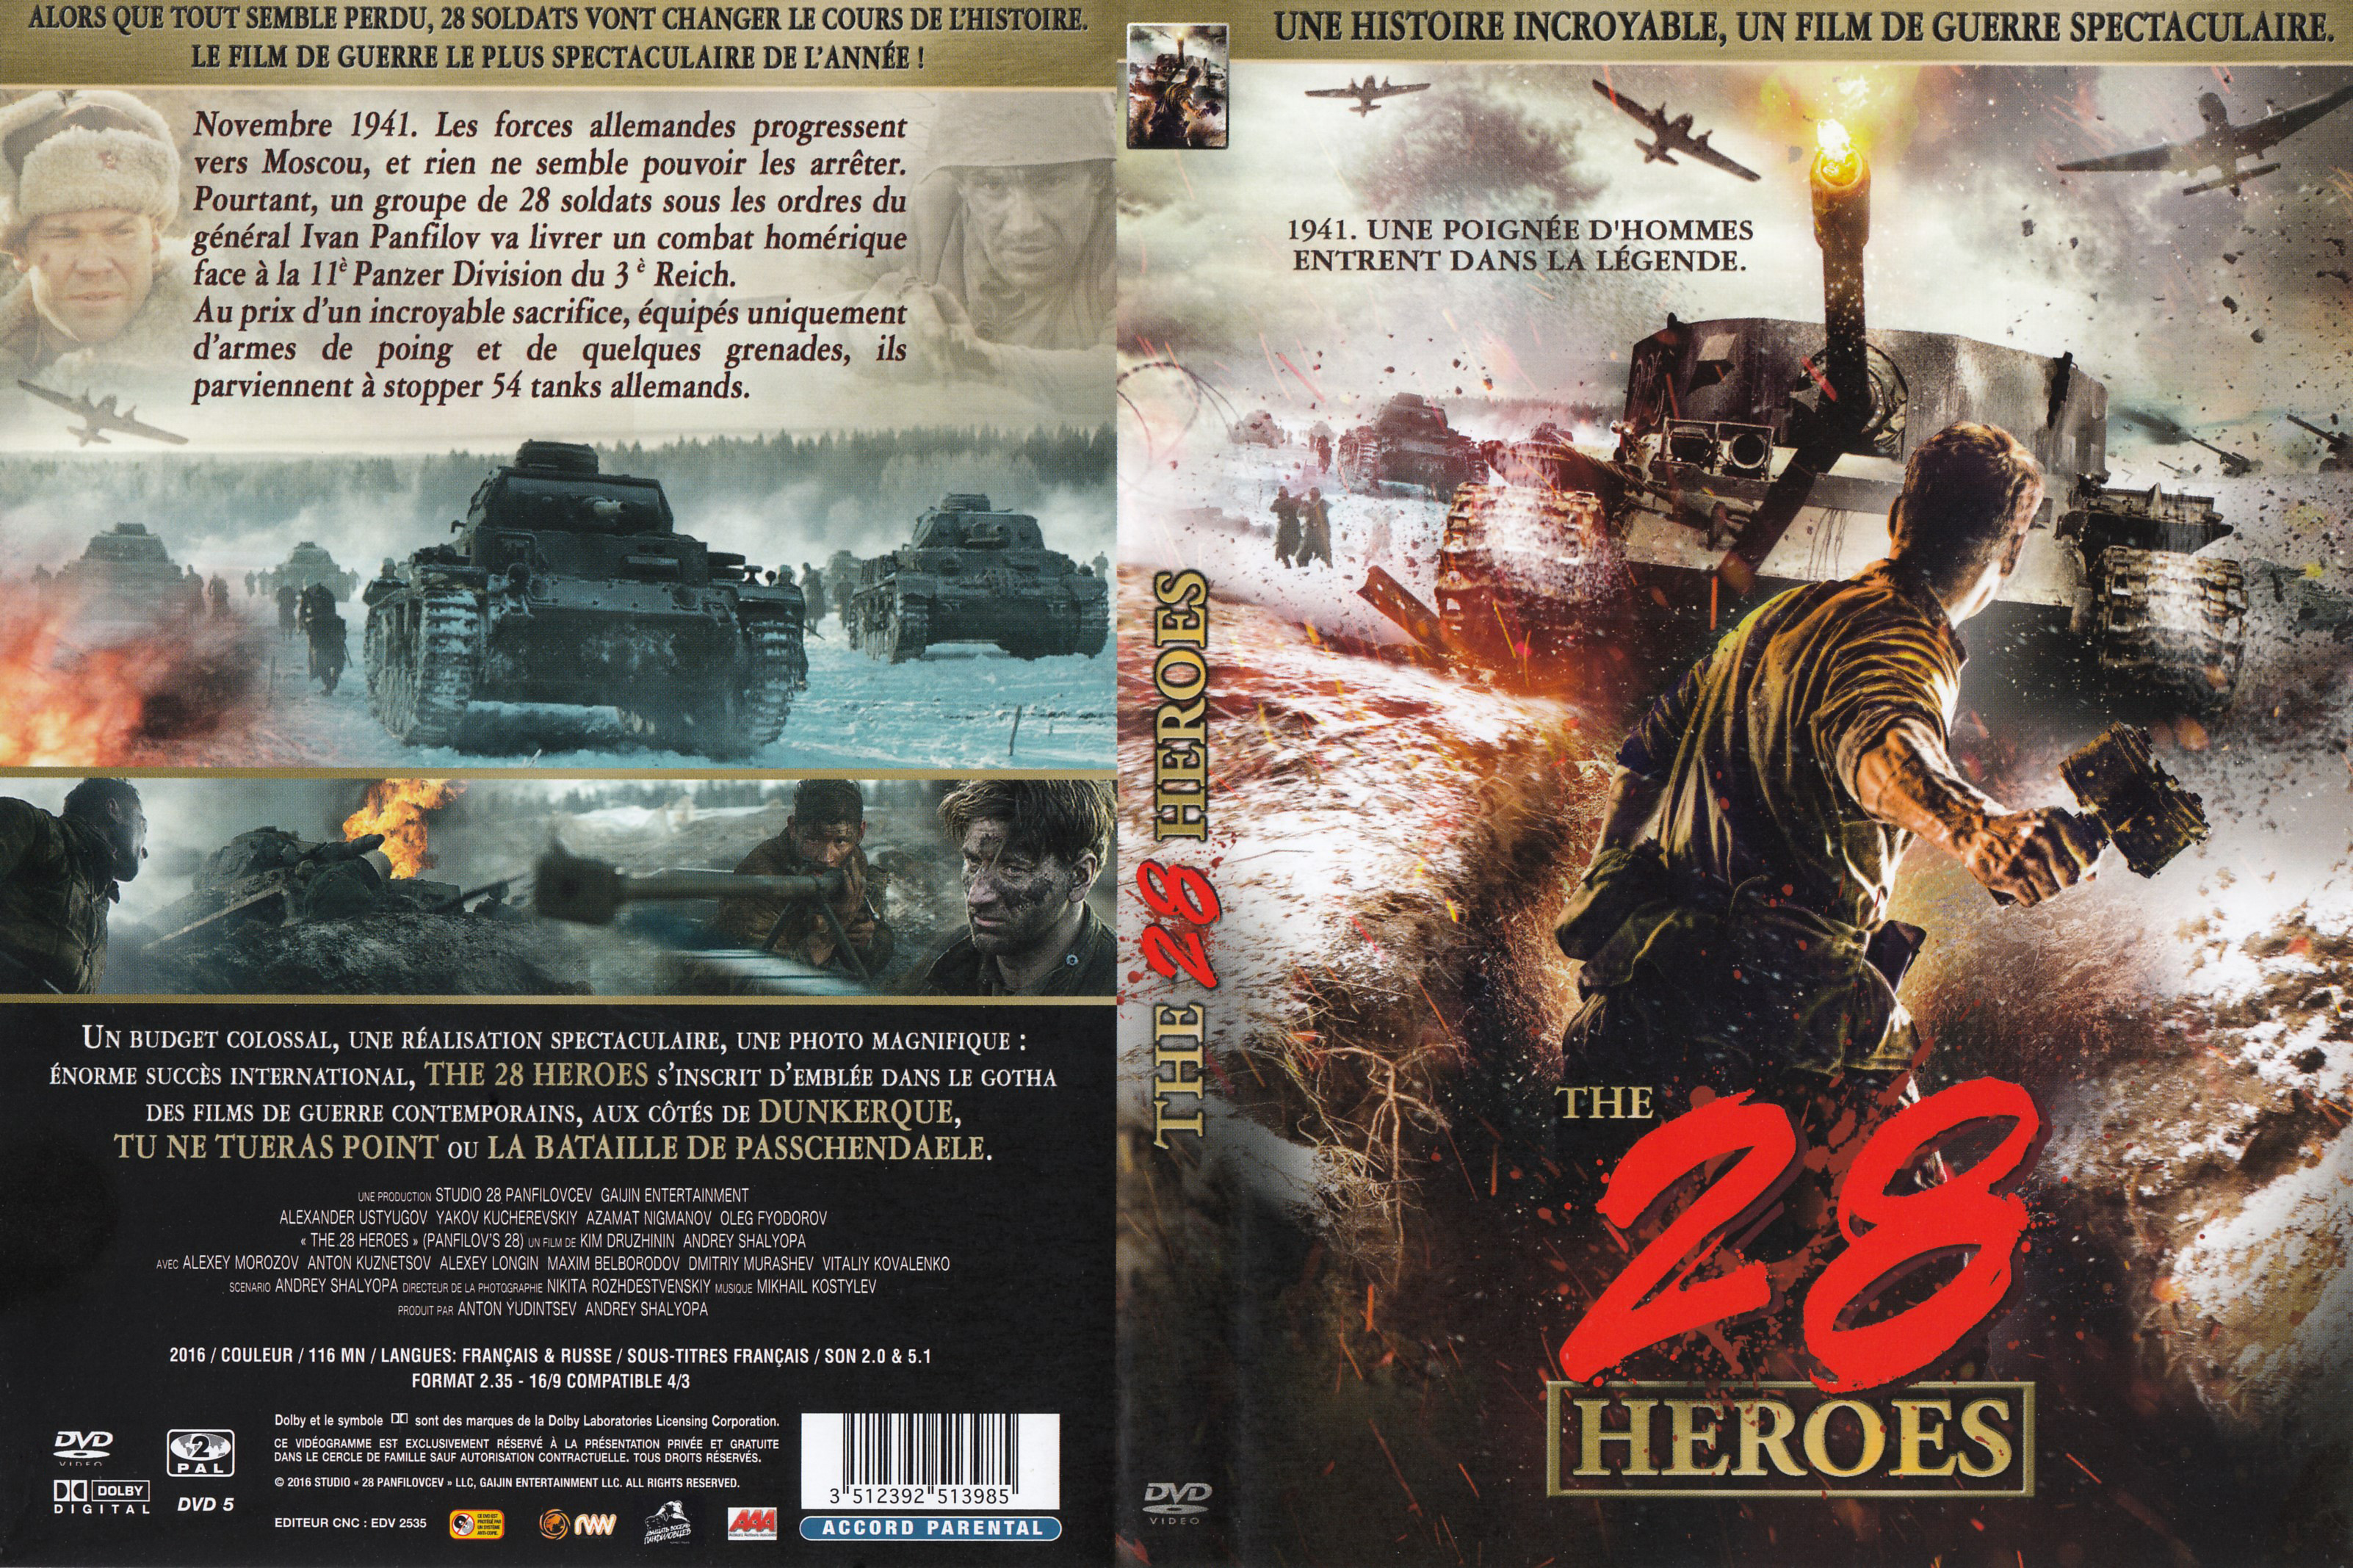 Jaquette DVD The 28 heroes